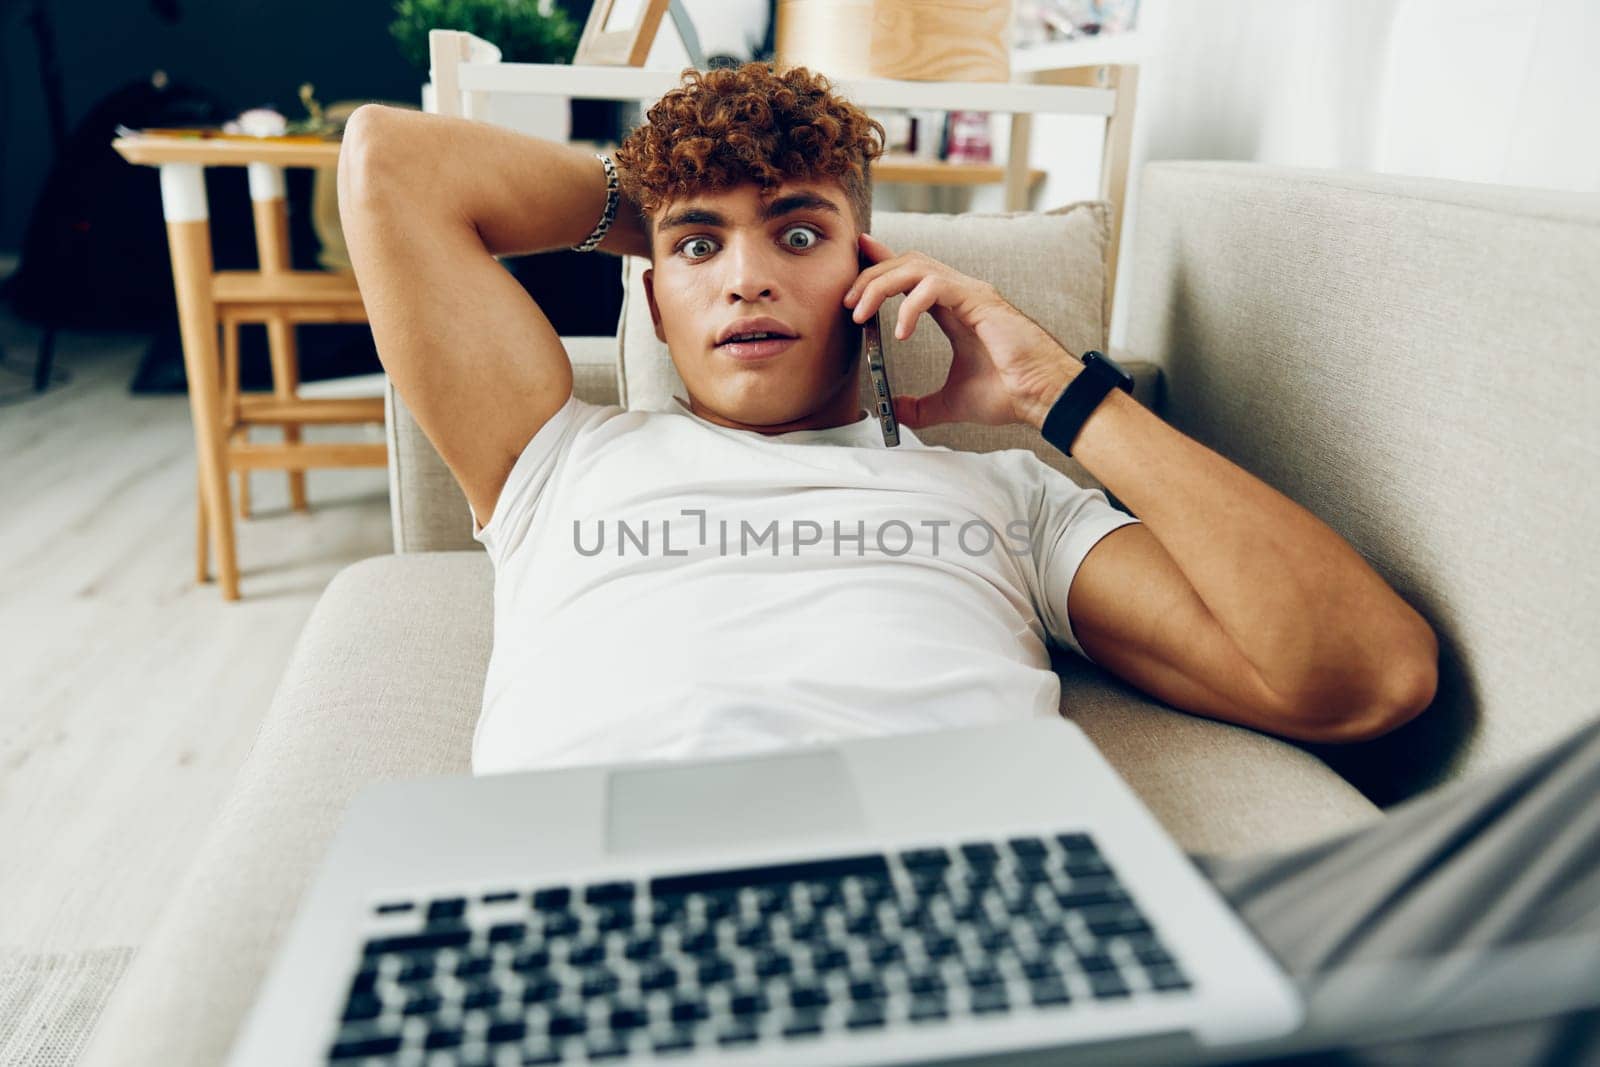 man interior room indoor t-shirt internet online laptop male looking education computer typing freelance using caucasian